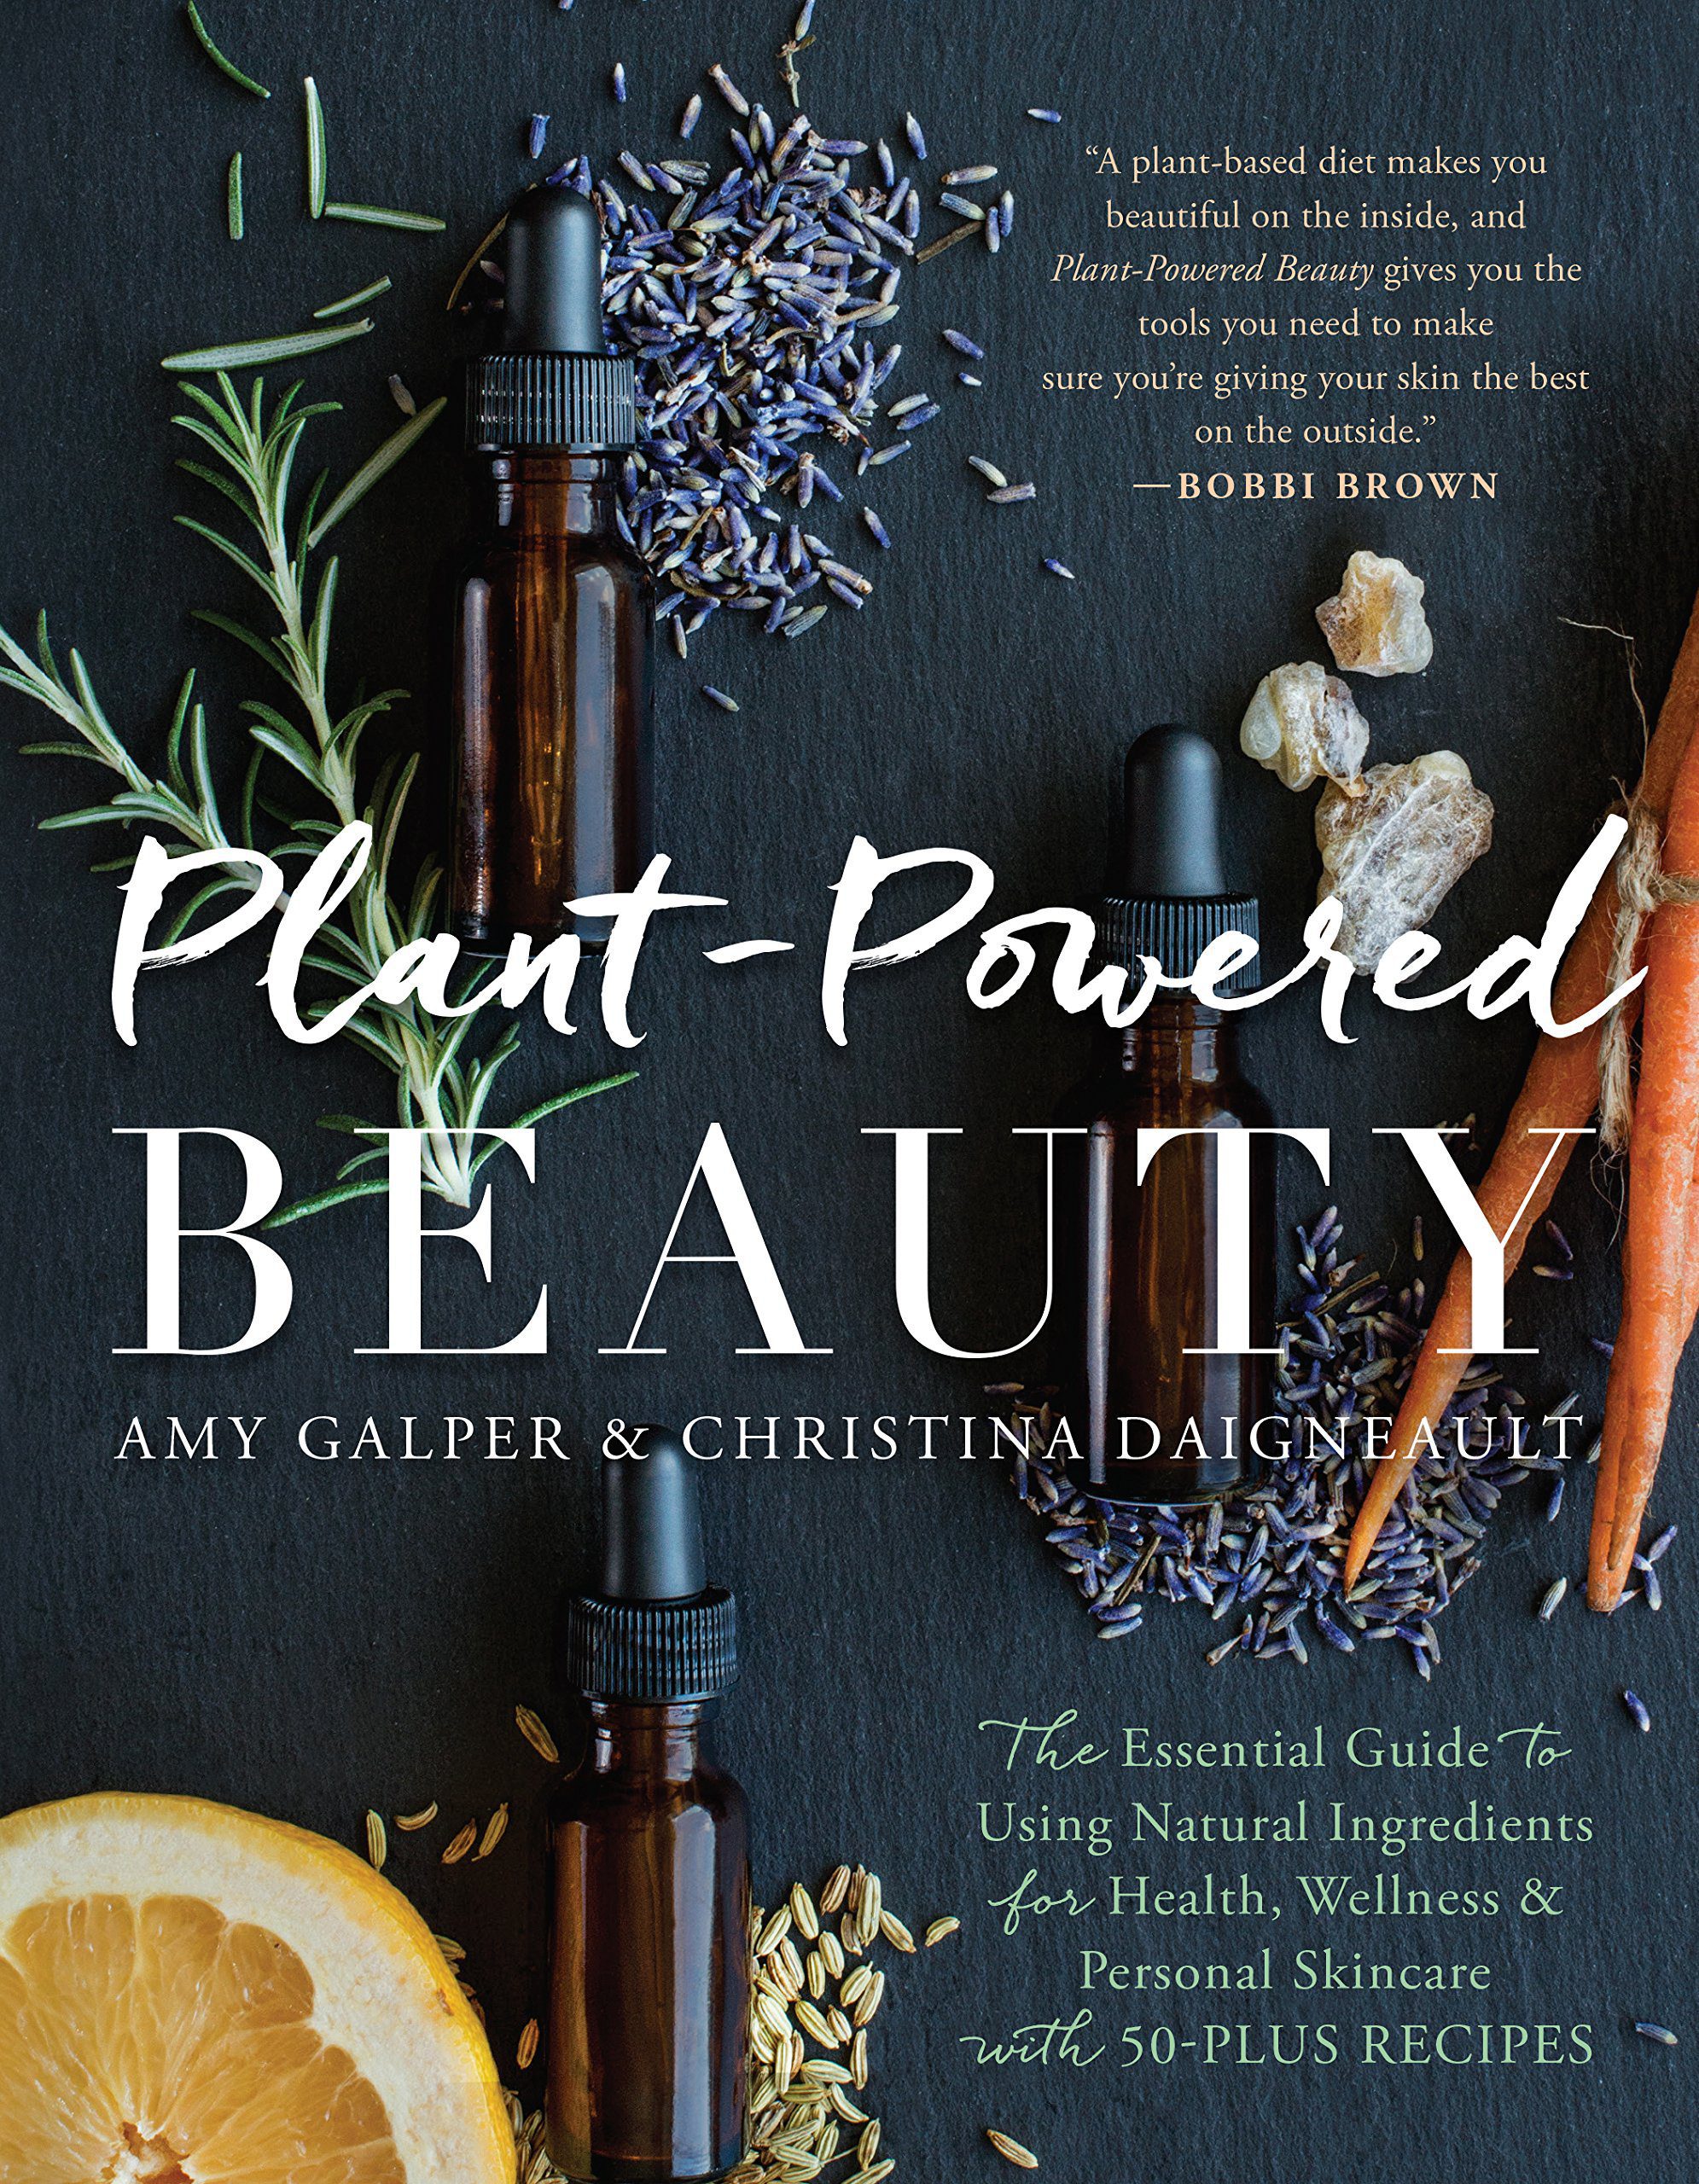 Plant-Powered Beauty: The Essential Guide to Using Natural Ingredients for Health, Wellness, and Personal Skincare